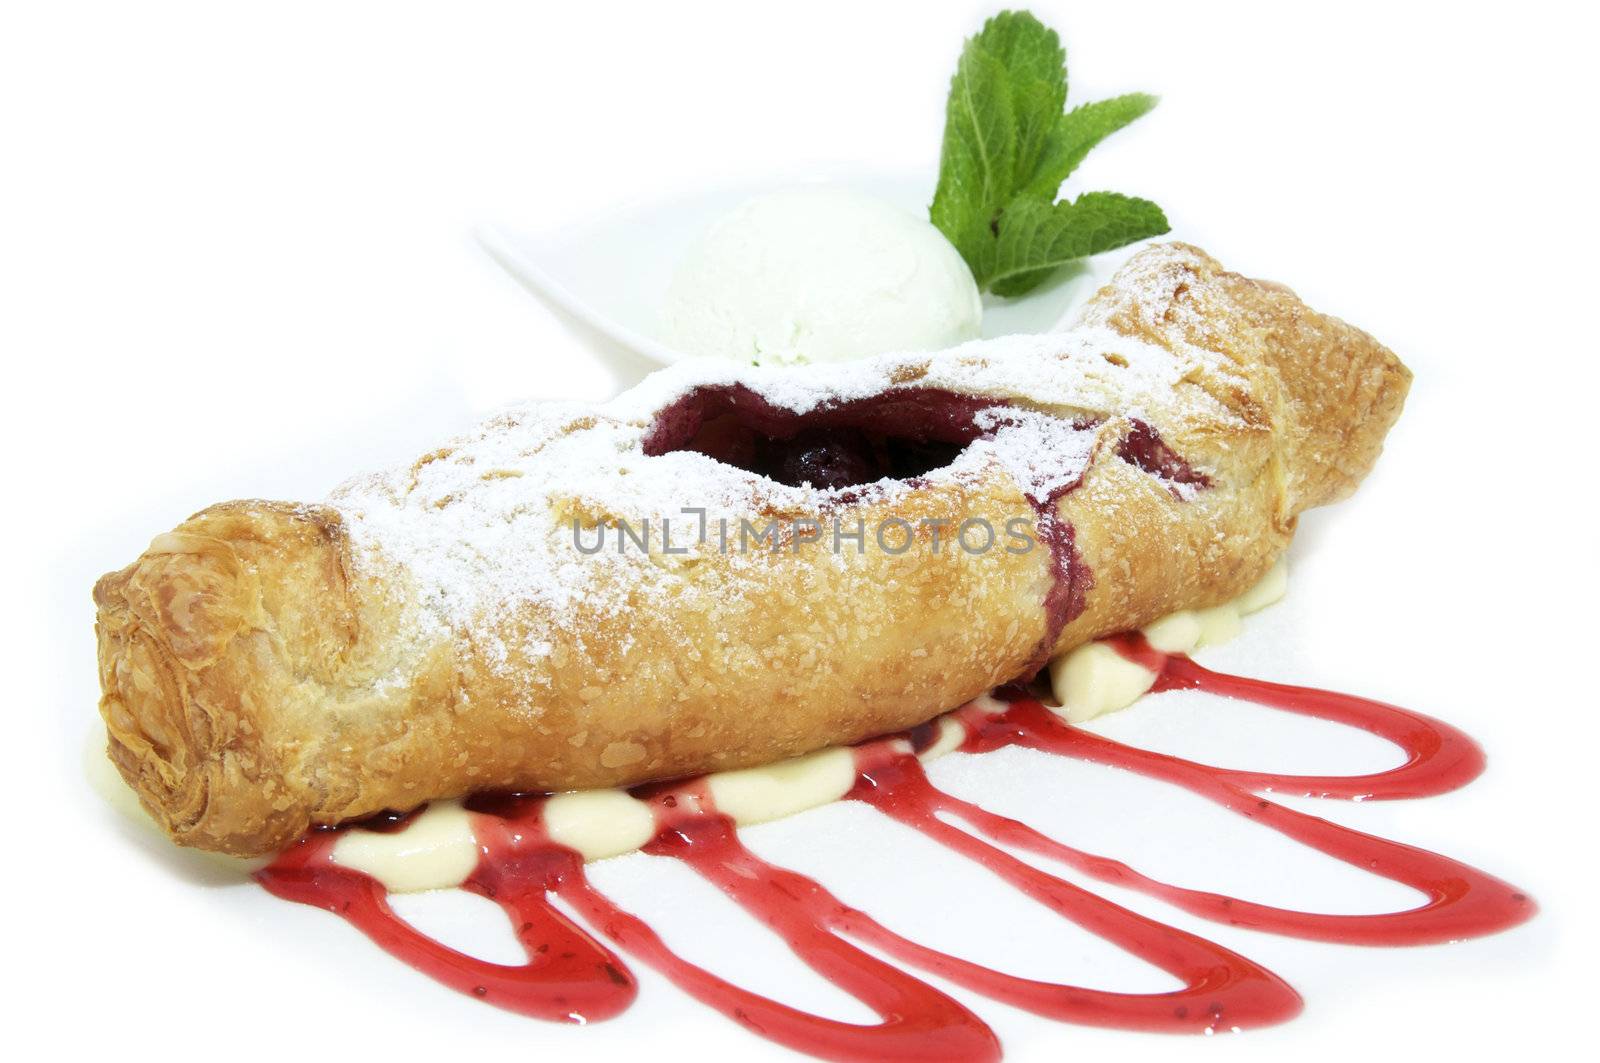 berry strudel on a white background decorated with mint